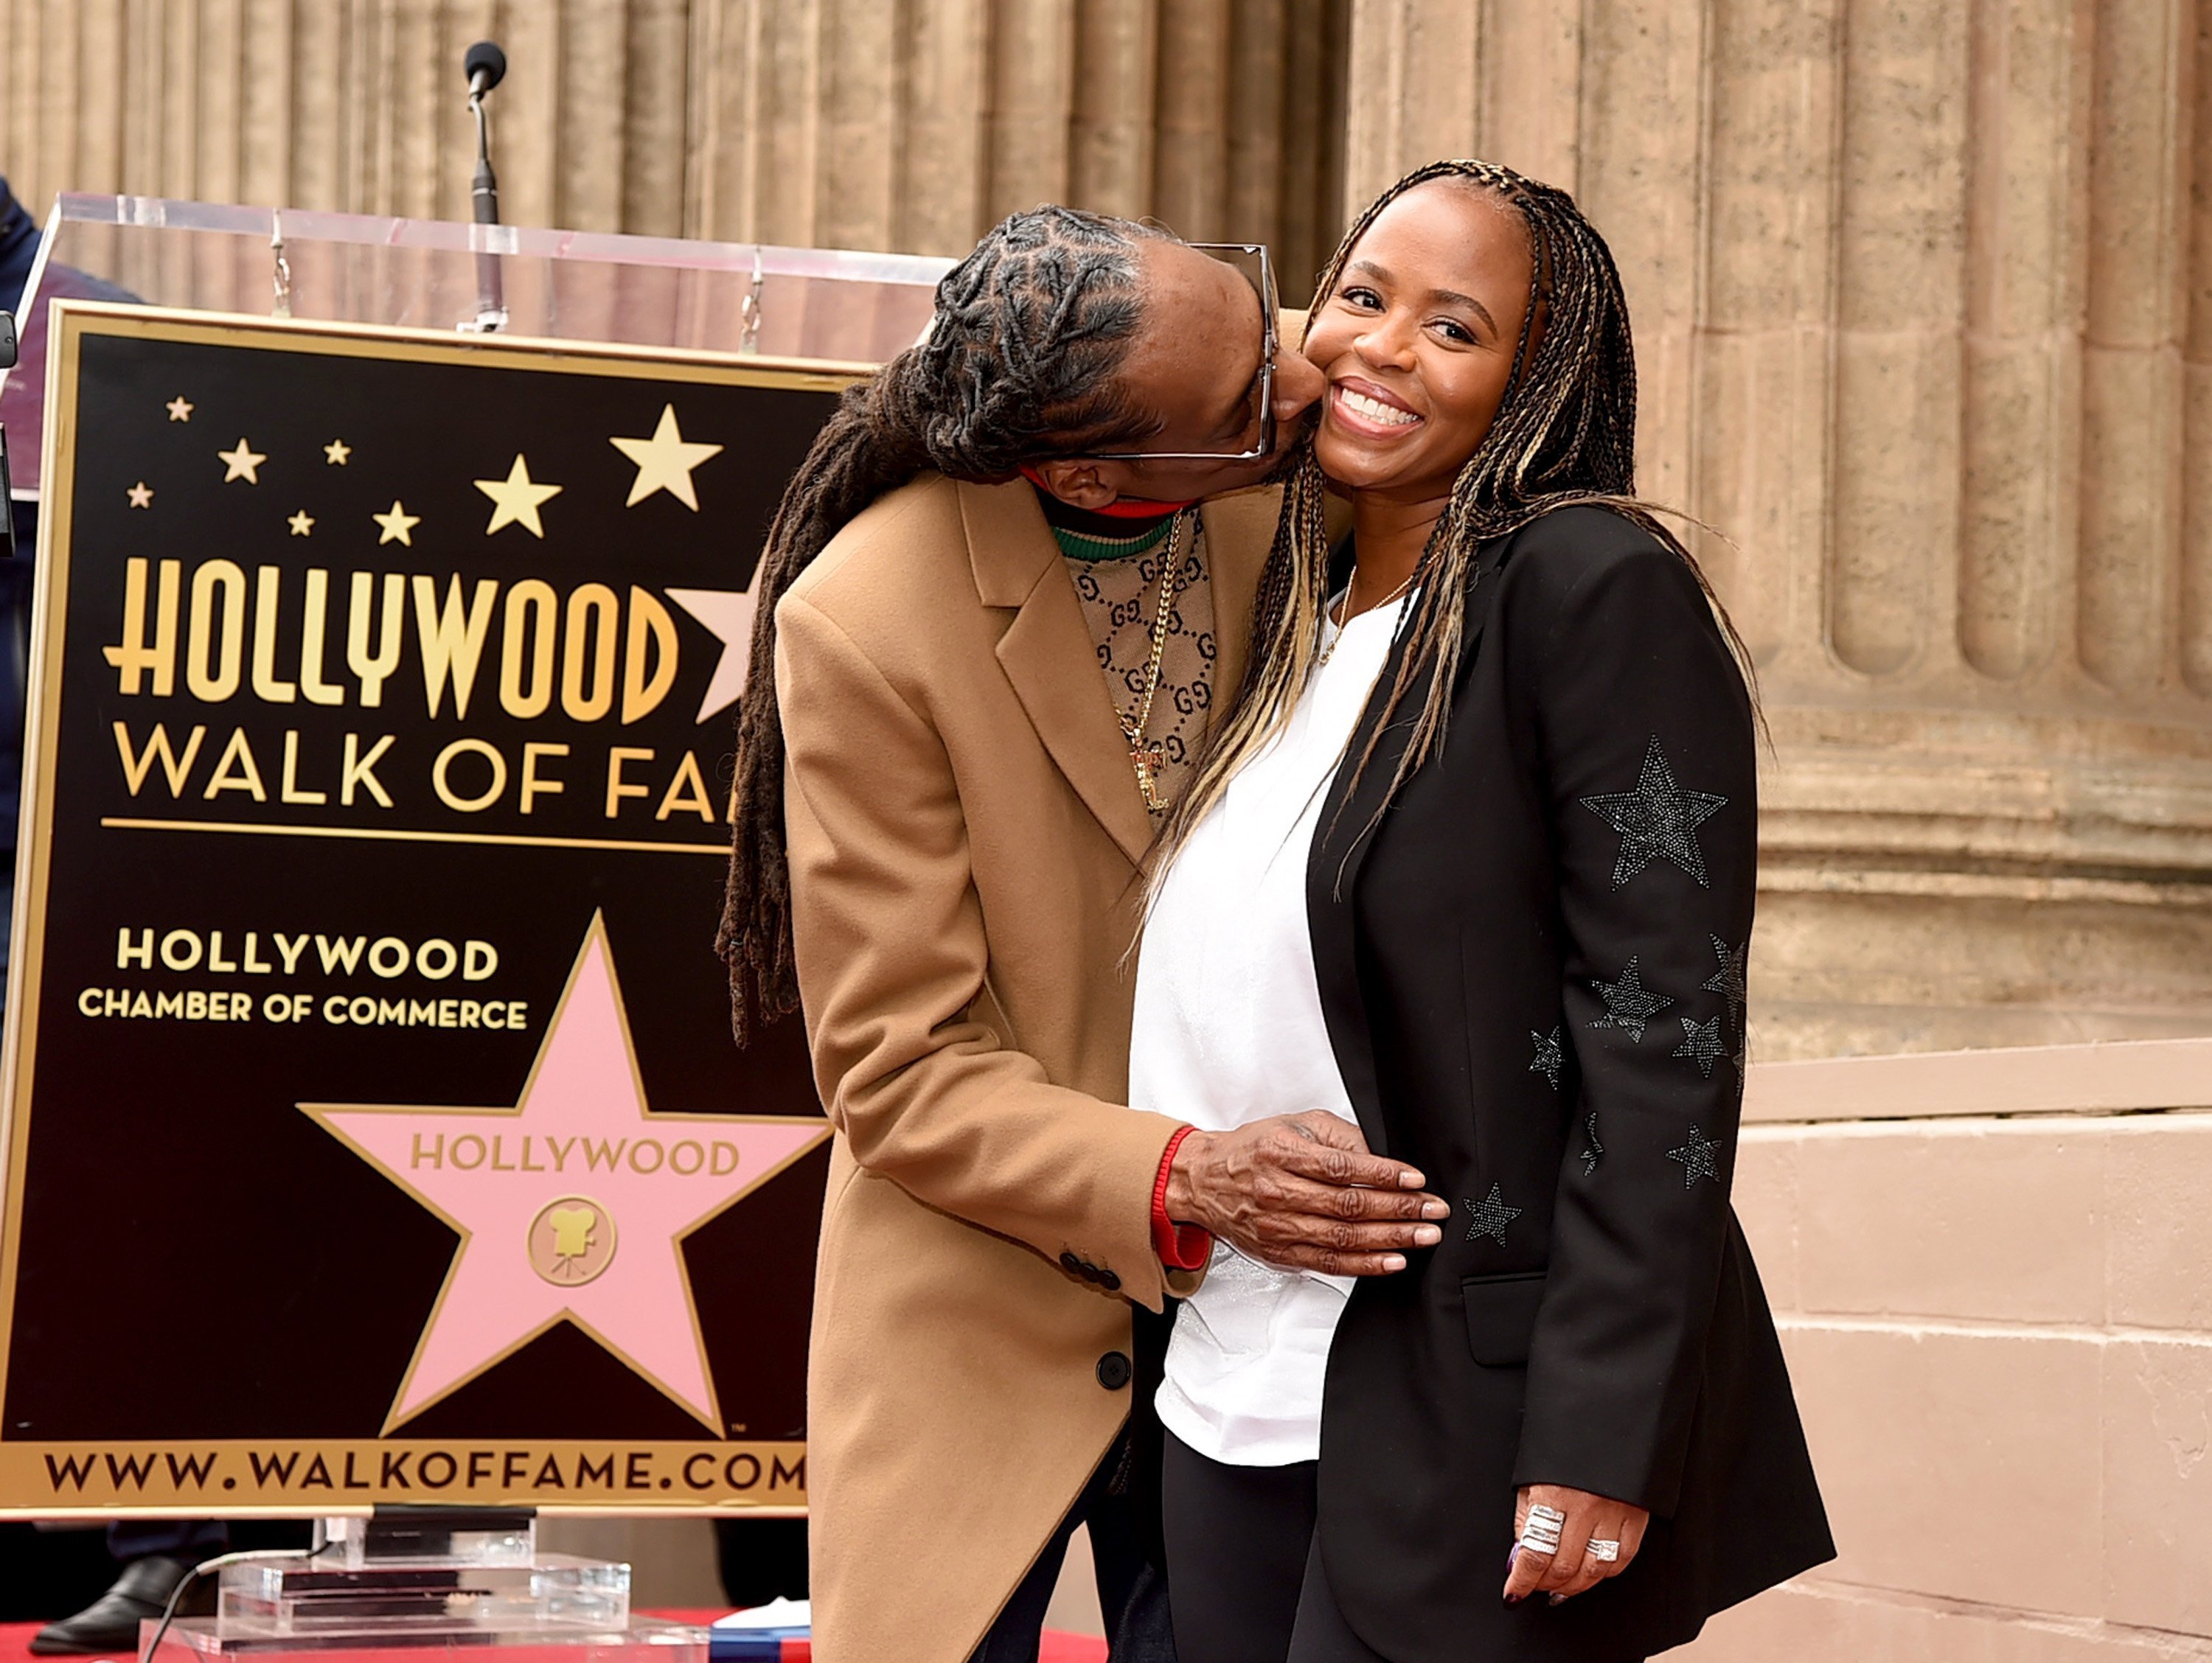 Snoop Dogg, with his wife Shante Broadus, is honored with a star on The Hollywood Walk Of Fame on November 19, 2018 | Photo: GettyImages